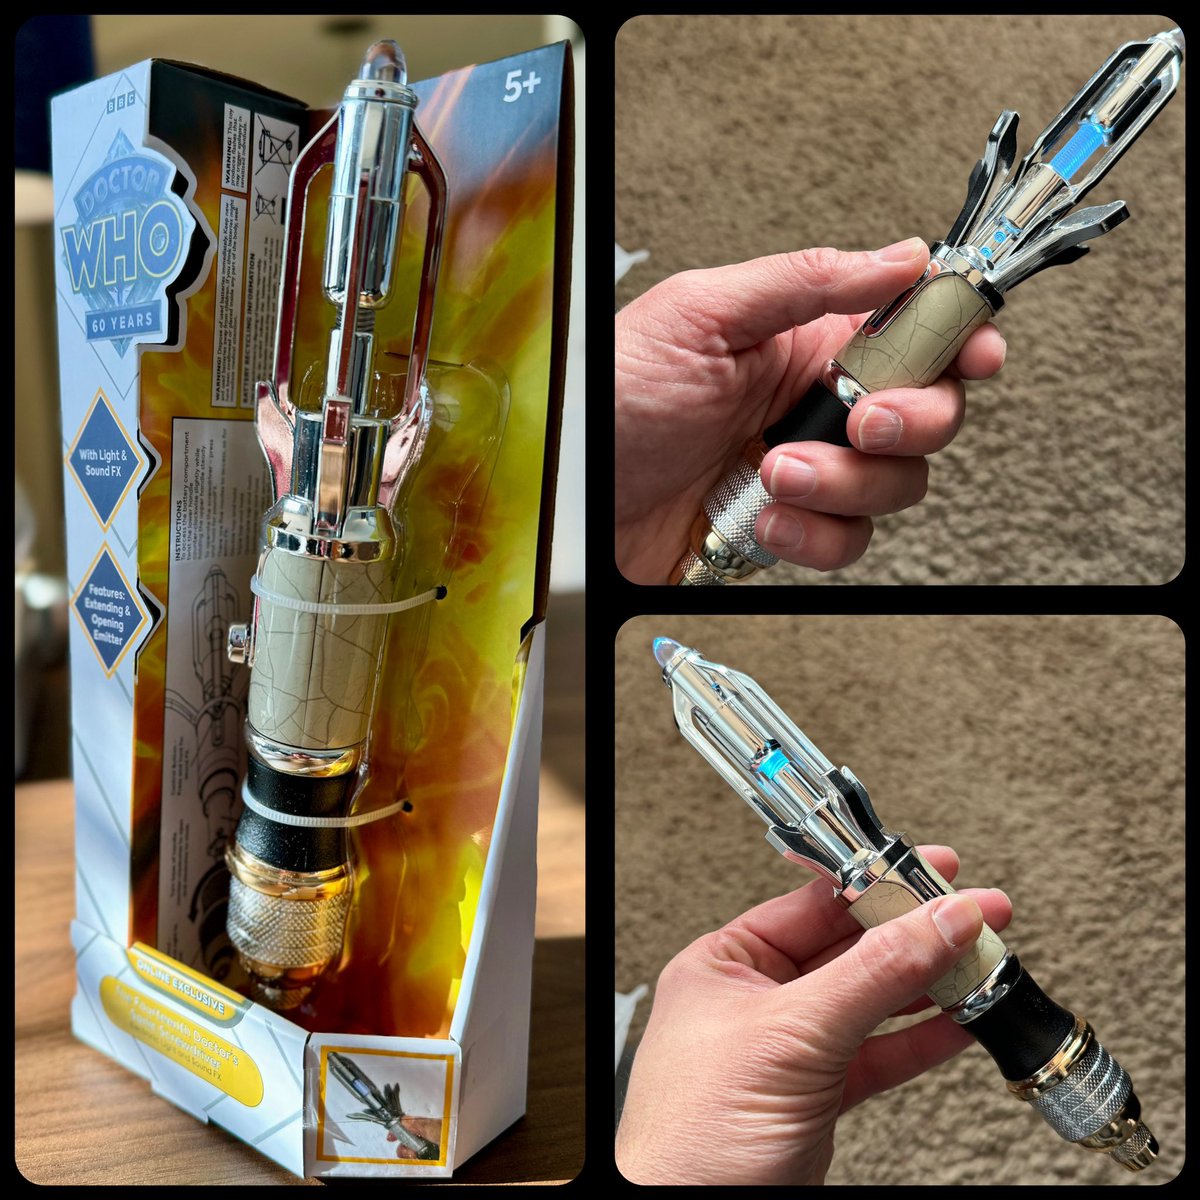 Pleasantly surprised with this chrome plated toy replica of the 14th Doctor’s Sonic screwdriver that I picked up from eBay!

Includes LEDs, slide-up action, and 5 different sound effects! 

Perfect for cons!

#doctorwho #14thdoctor #sonicscrewdriver #DavidTennant #spproductions